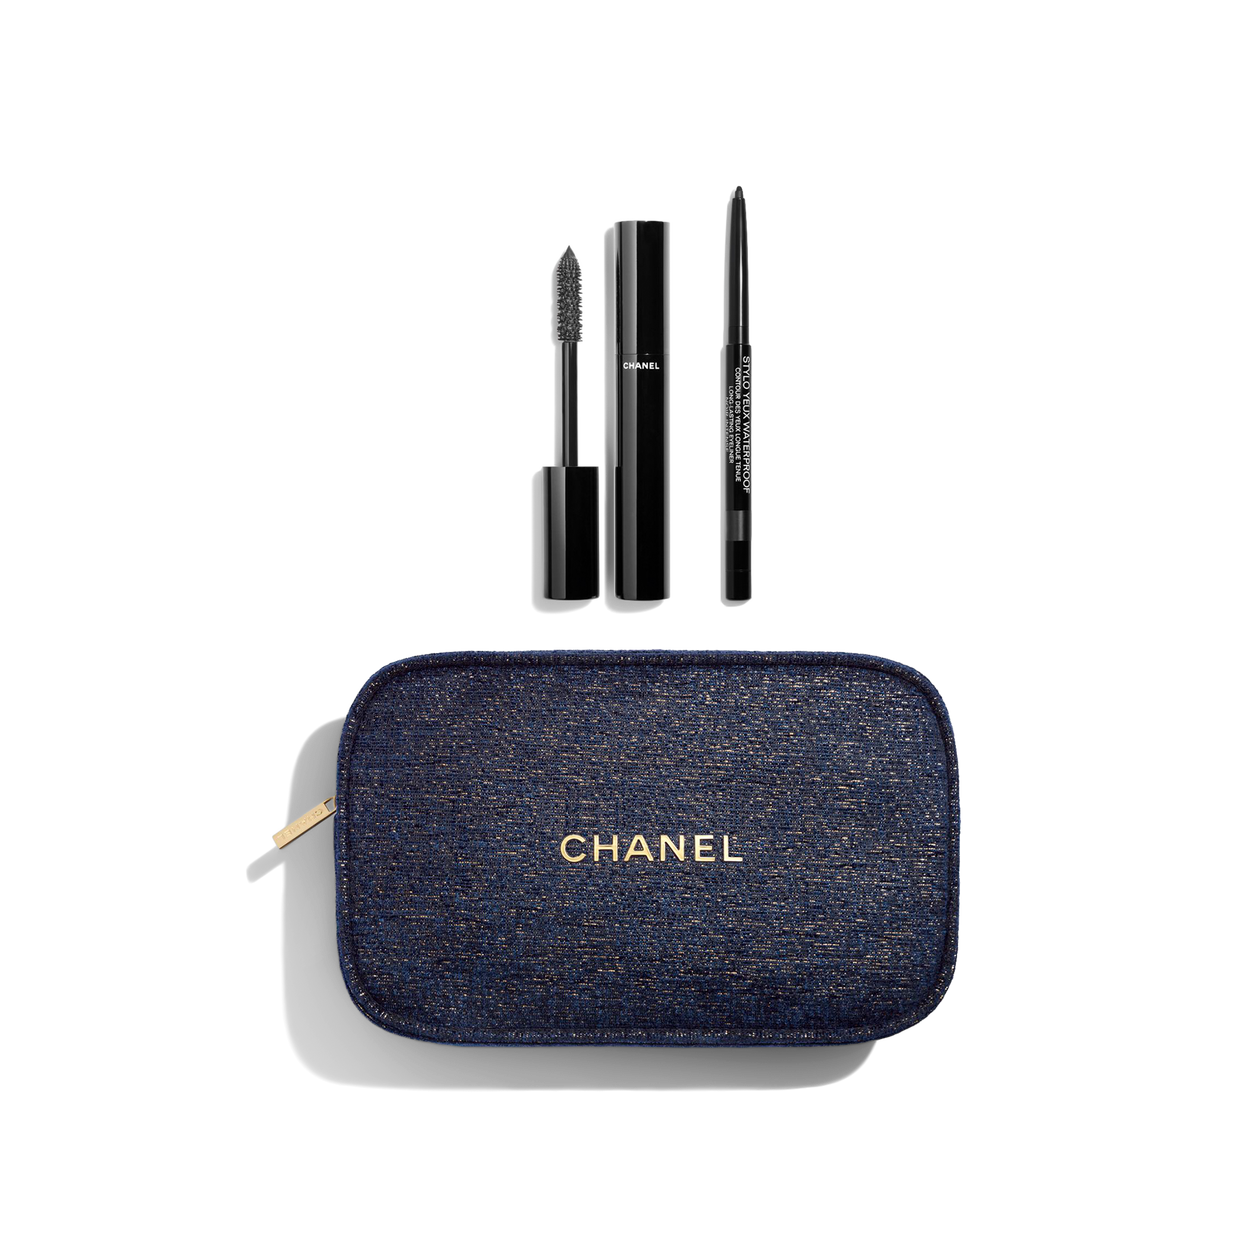 A SIGHT TO SEE Eye Makeup Set - CHANEL